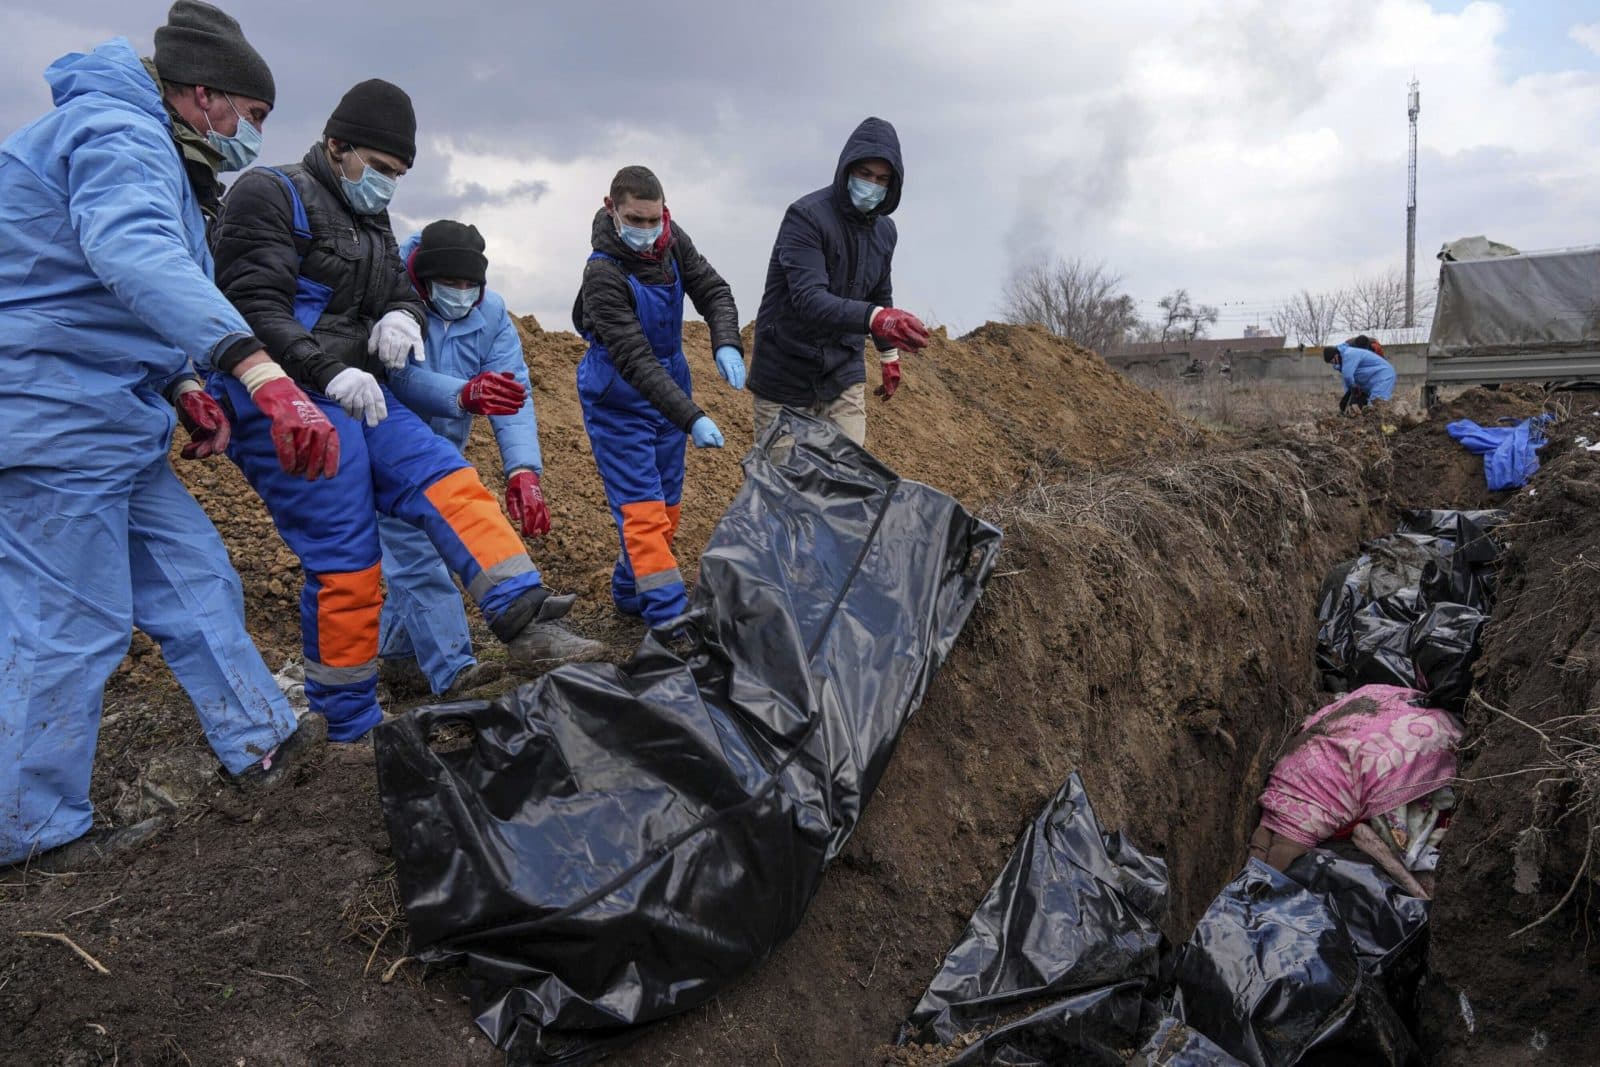 The UN confirmed the killings of civilians by the Russian army in 30 cities of Ukraine